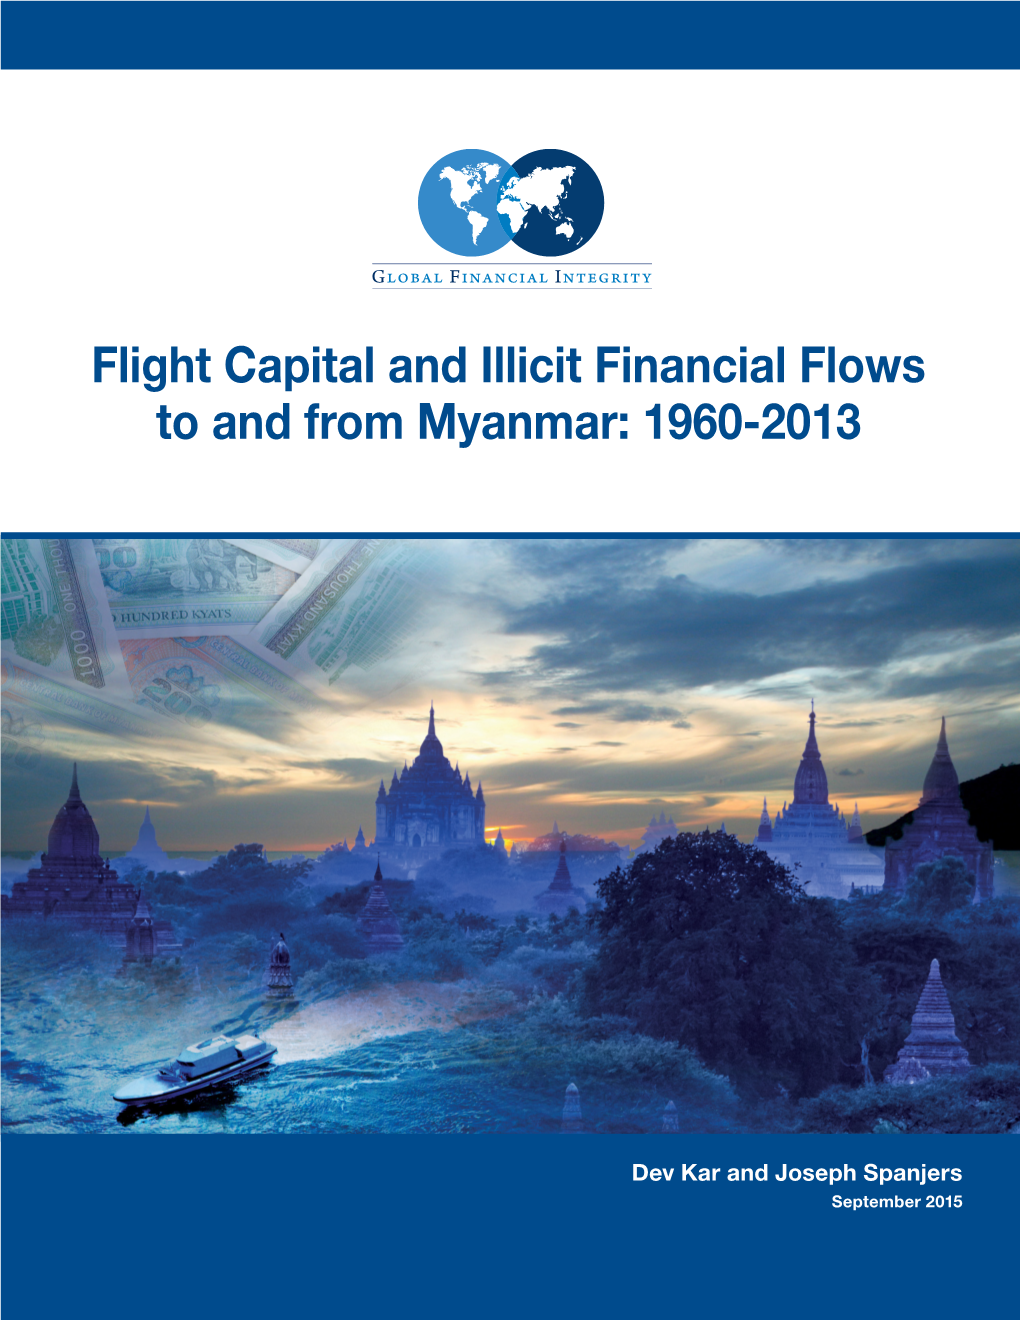 Flight Capital and Illicit Financial Flows to and from Myanmar: 1960-2013